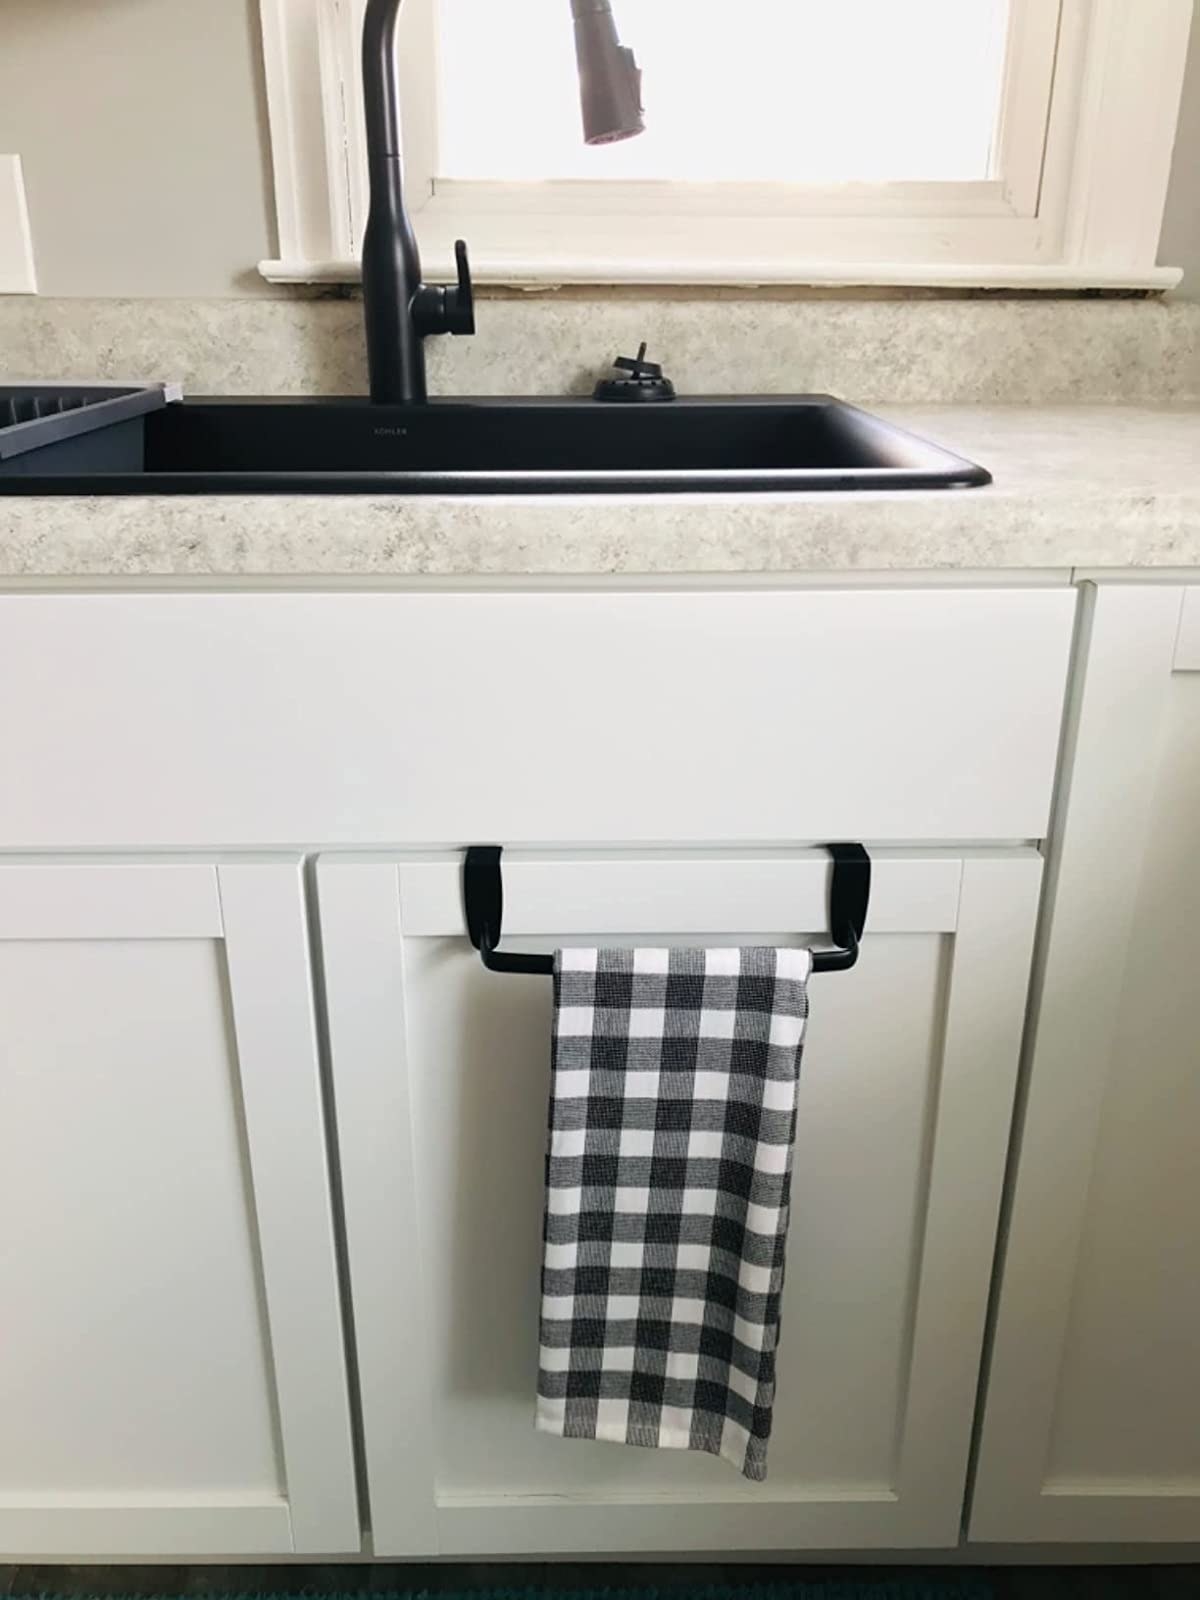 Reviewer image of checkered towel hanging on bar in a kitchen